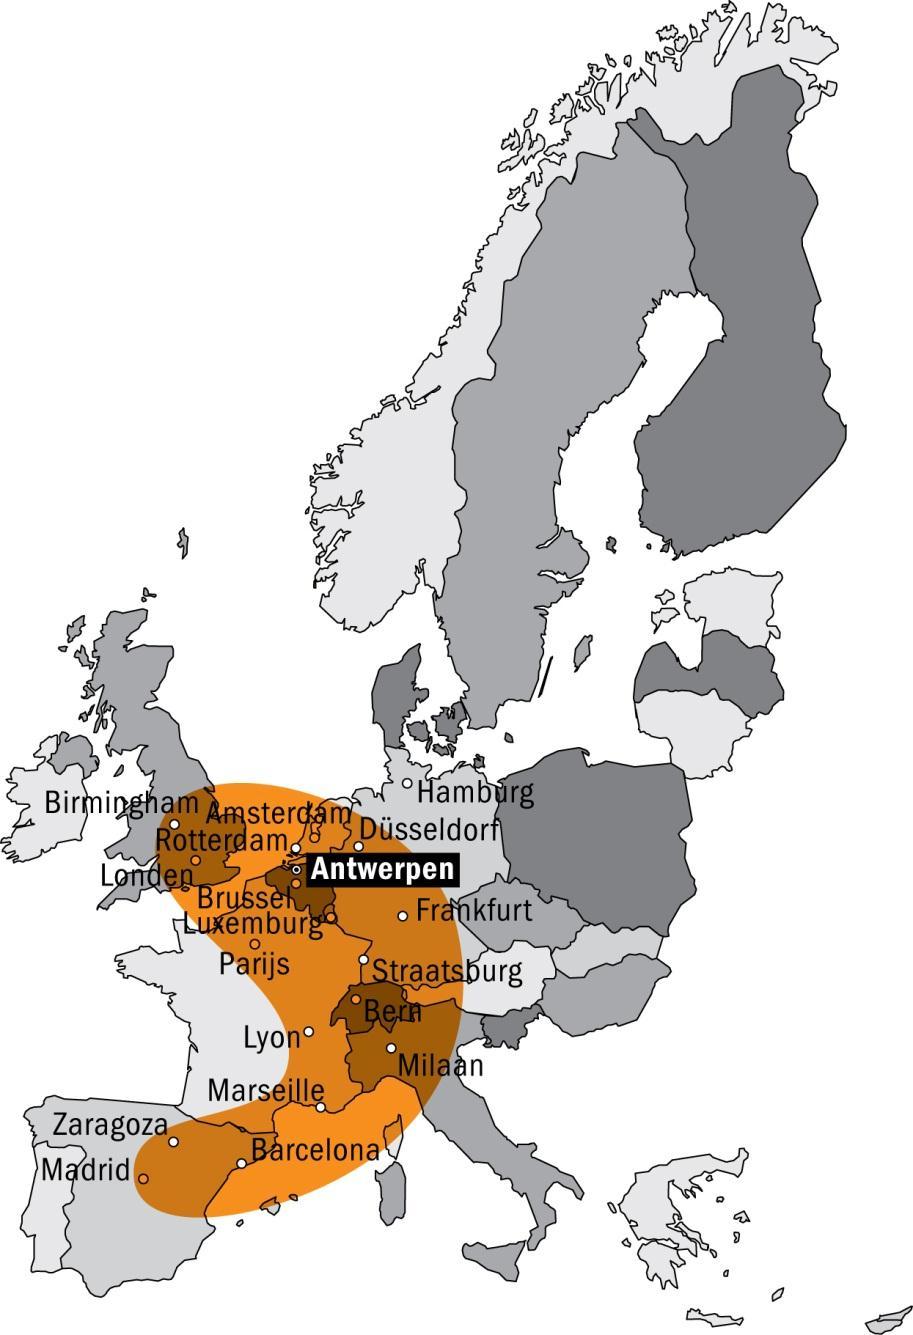 In the heart of Europe The banana contains the main European centres of production and